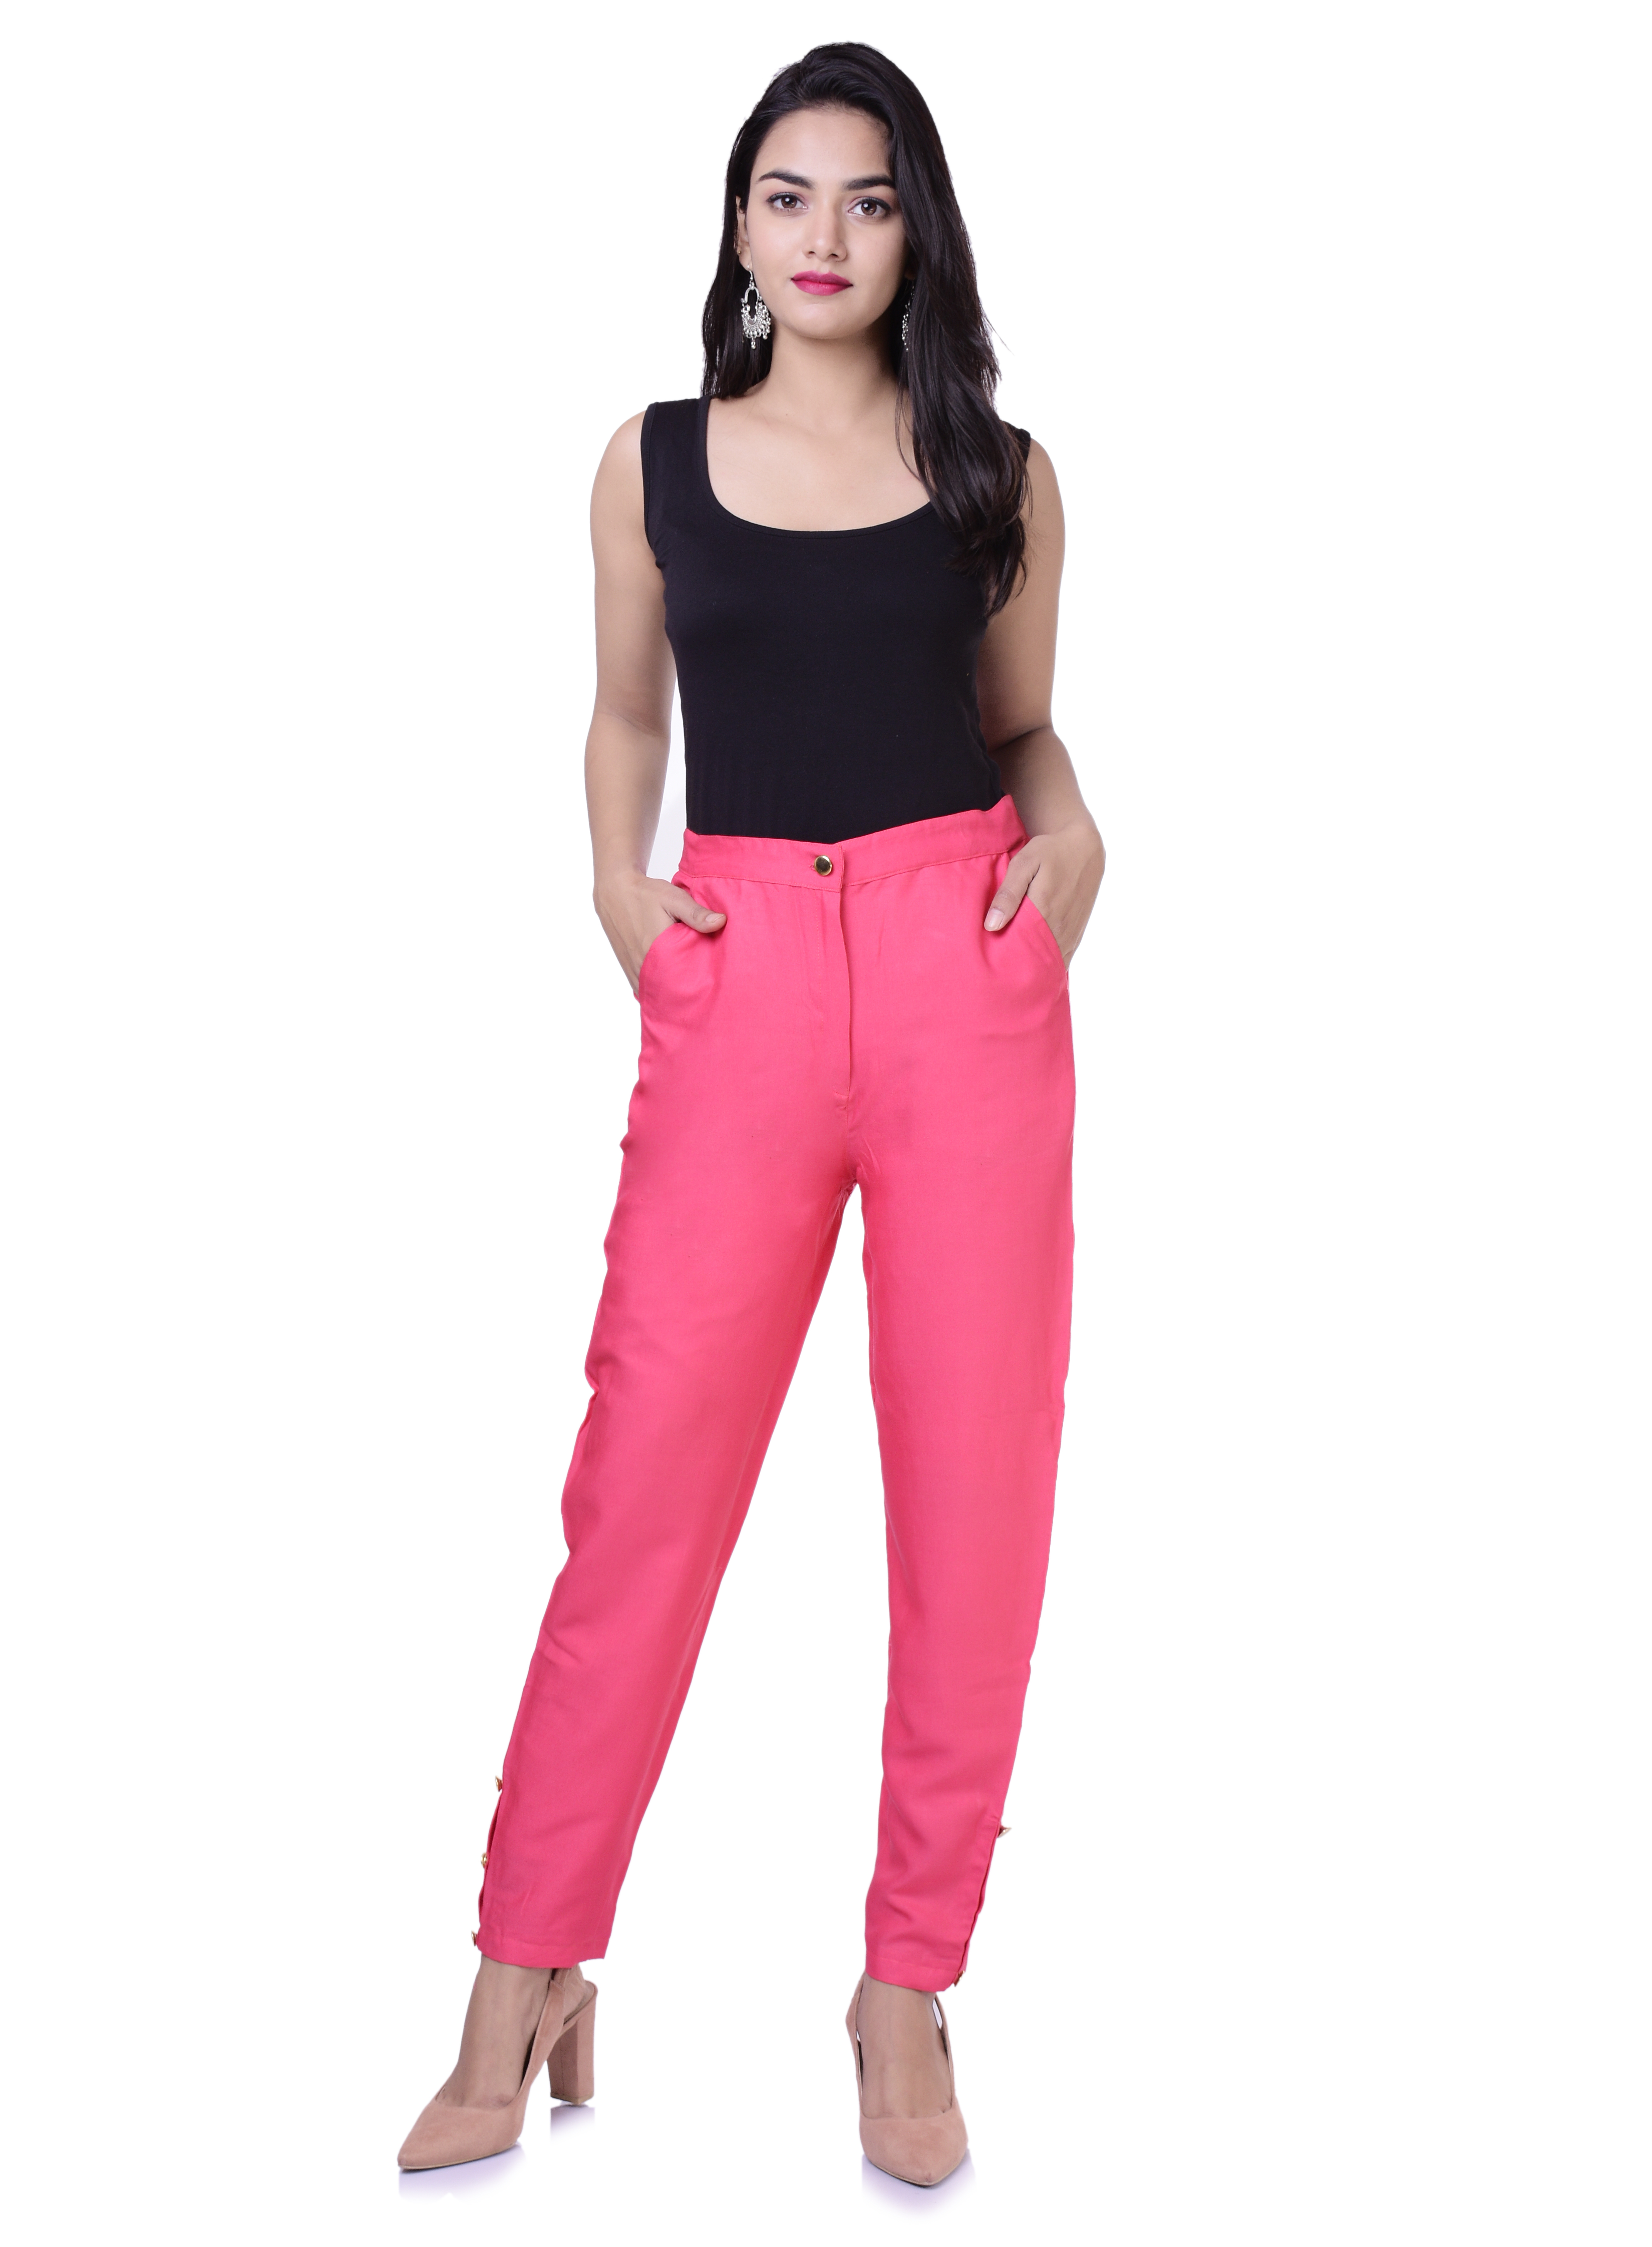 Black Shirt and Pink Trouser for Casual Office Wear  Best Fashion Blog For  Men  TheUnstitchdcom